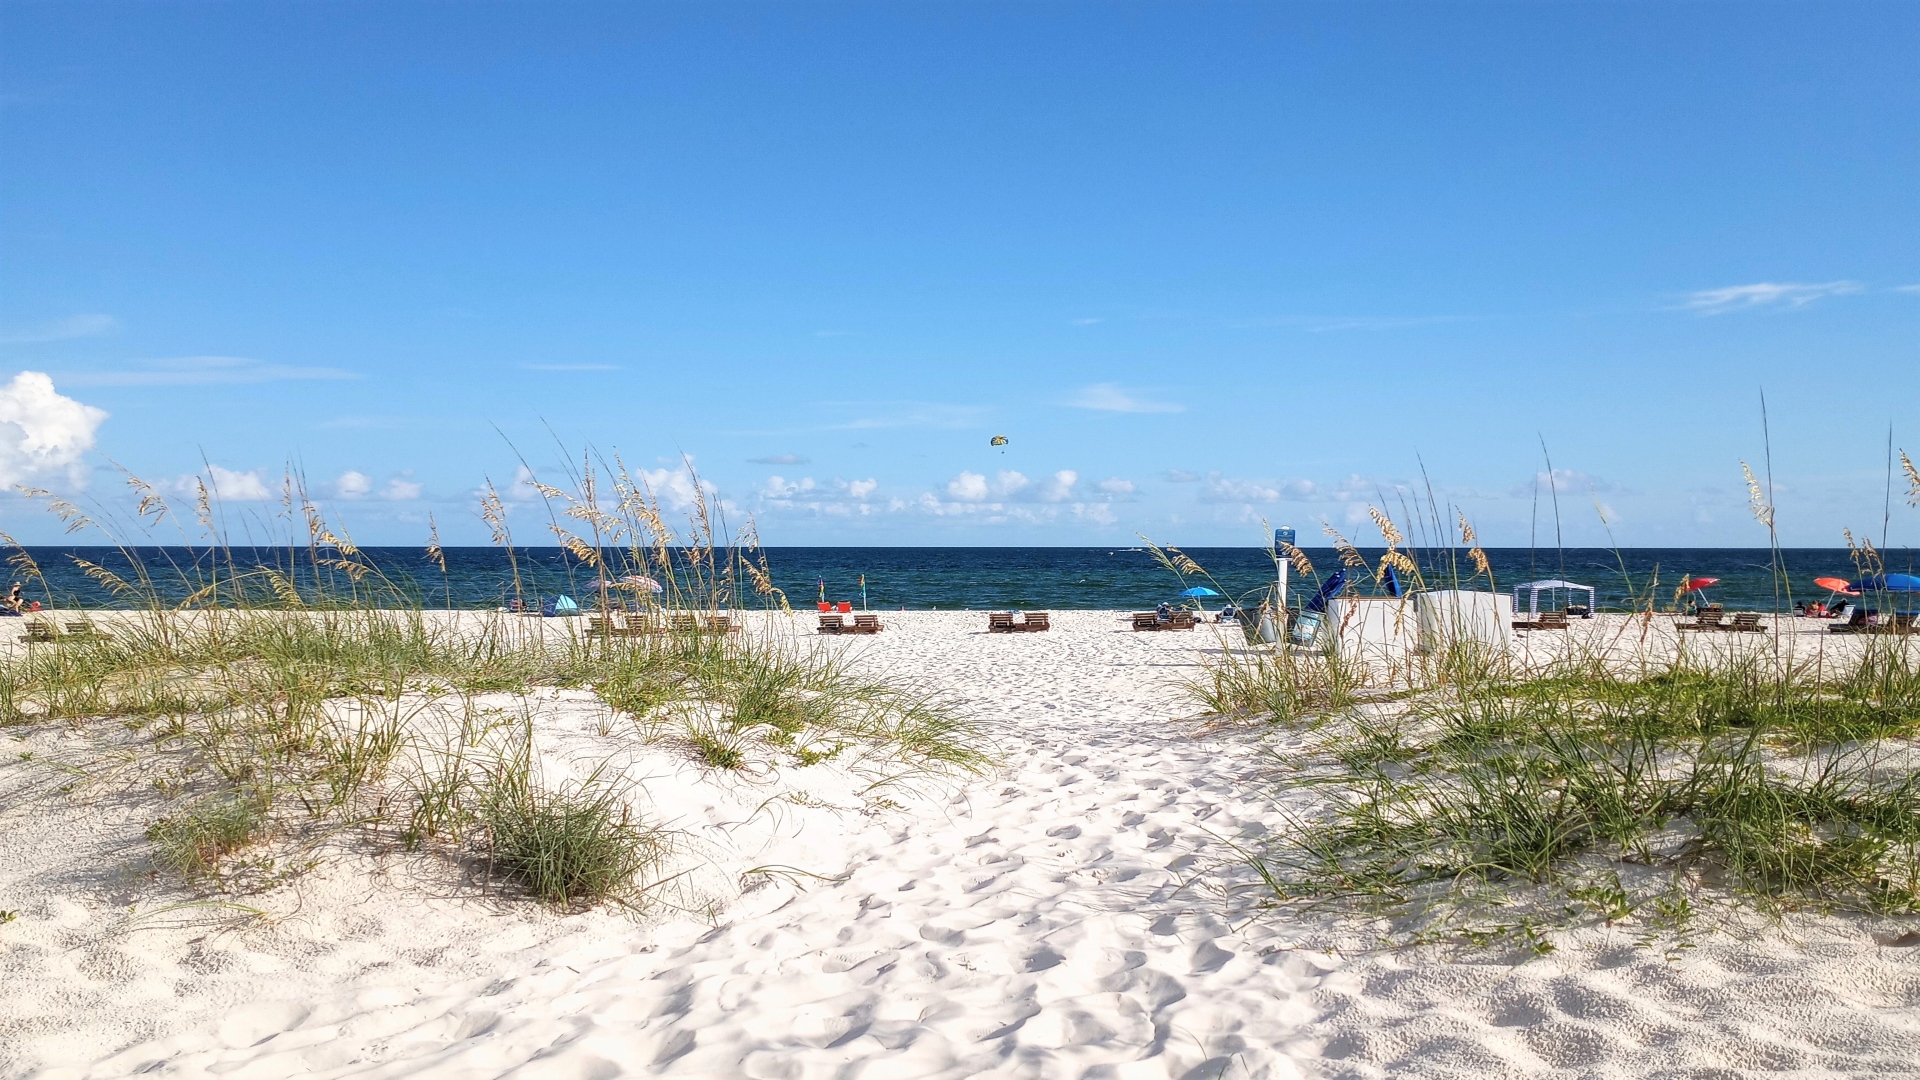 An image of the beach located in Orange Beach